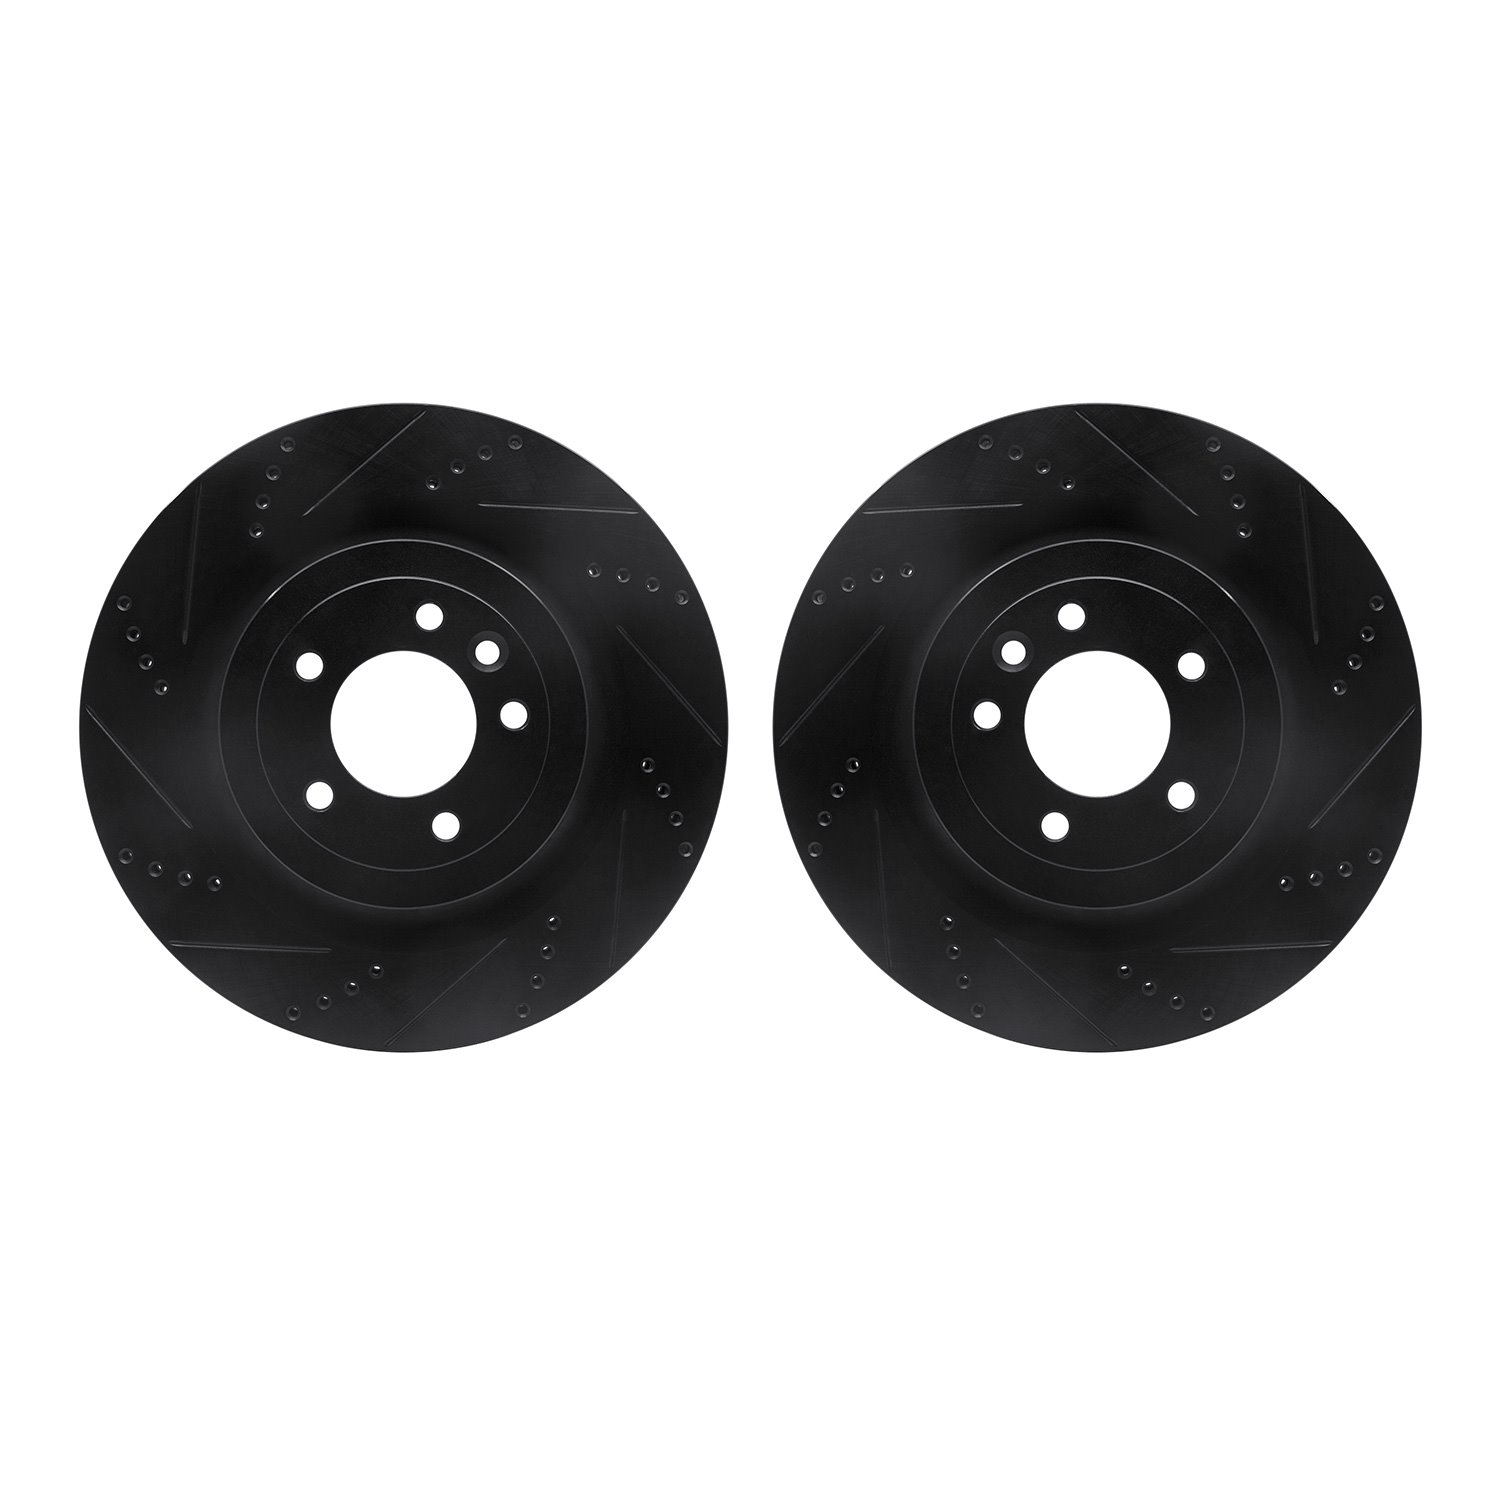 8002-11033 Drilled/Slotted Brake Rotors [Black], Fits Select Land Rover, Position: Rear